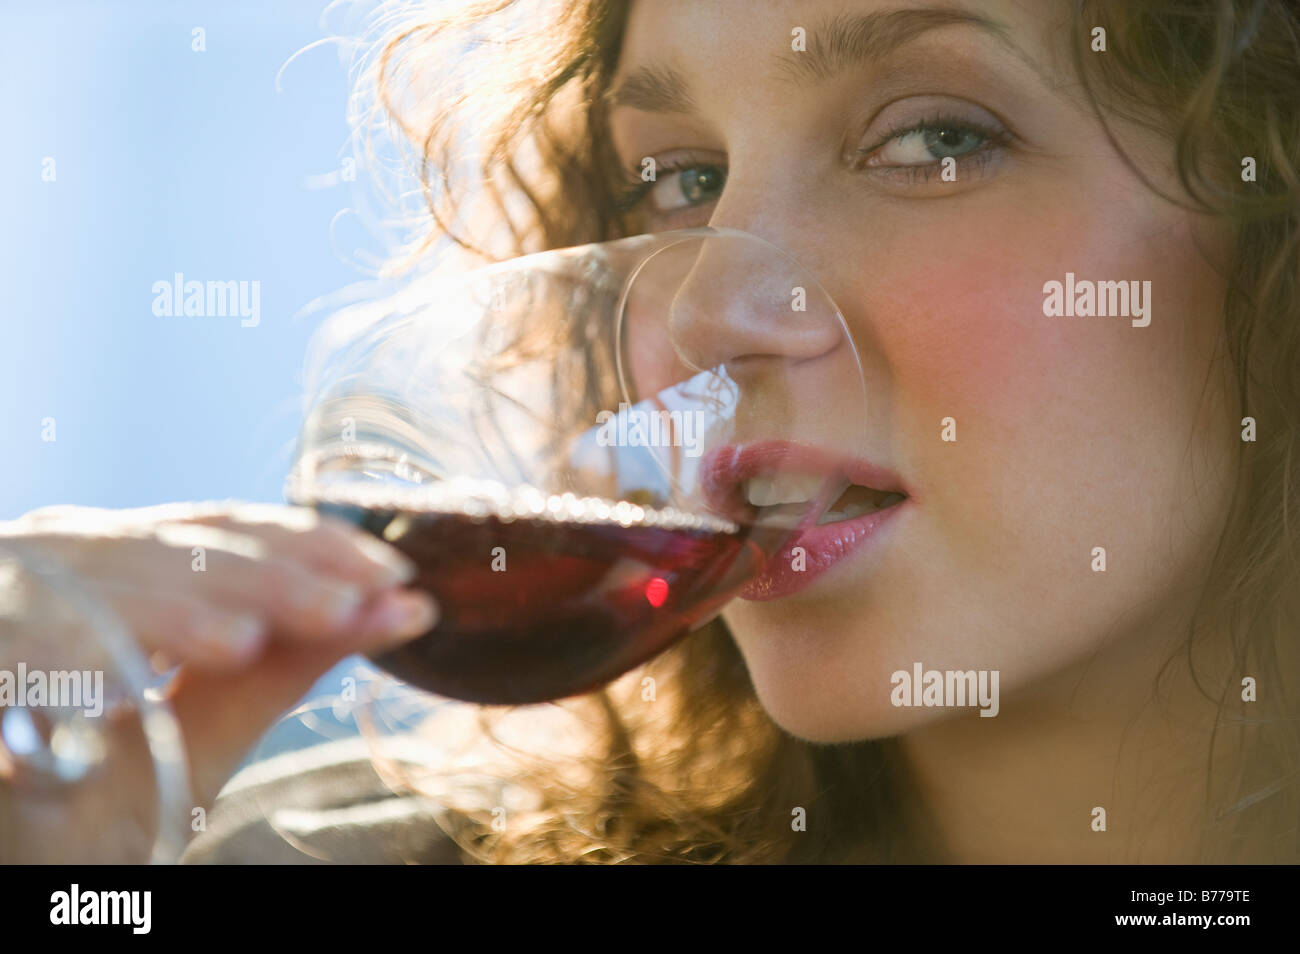 Close up portrait of woman drinking red wine Stock Photo